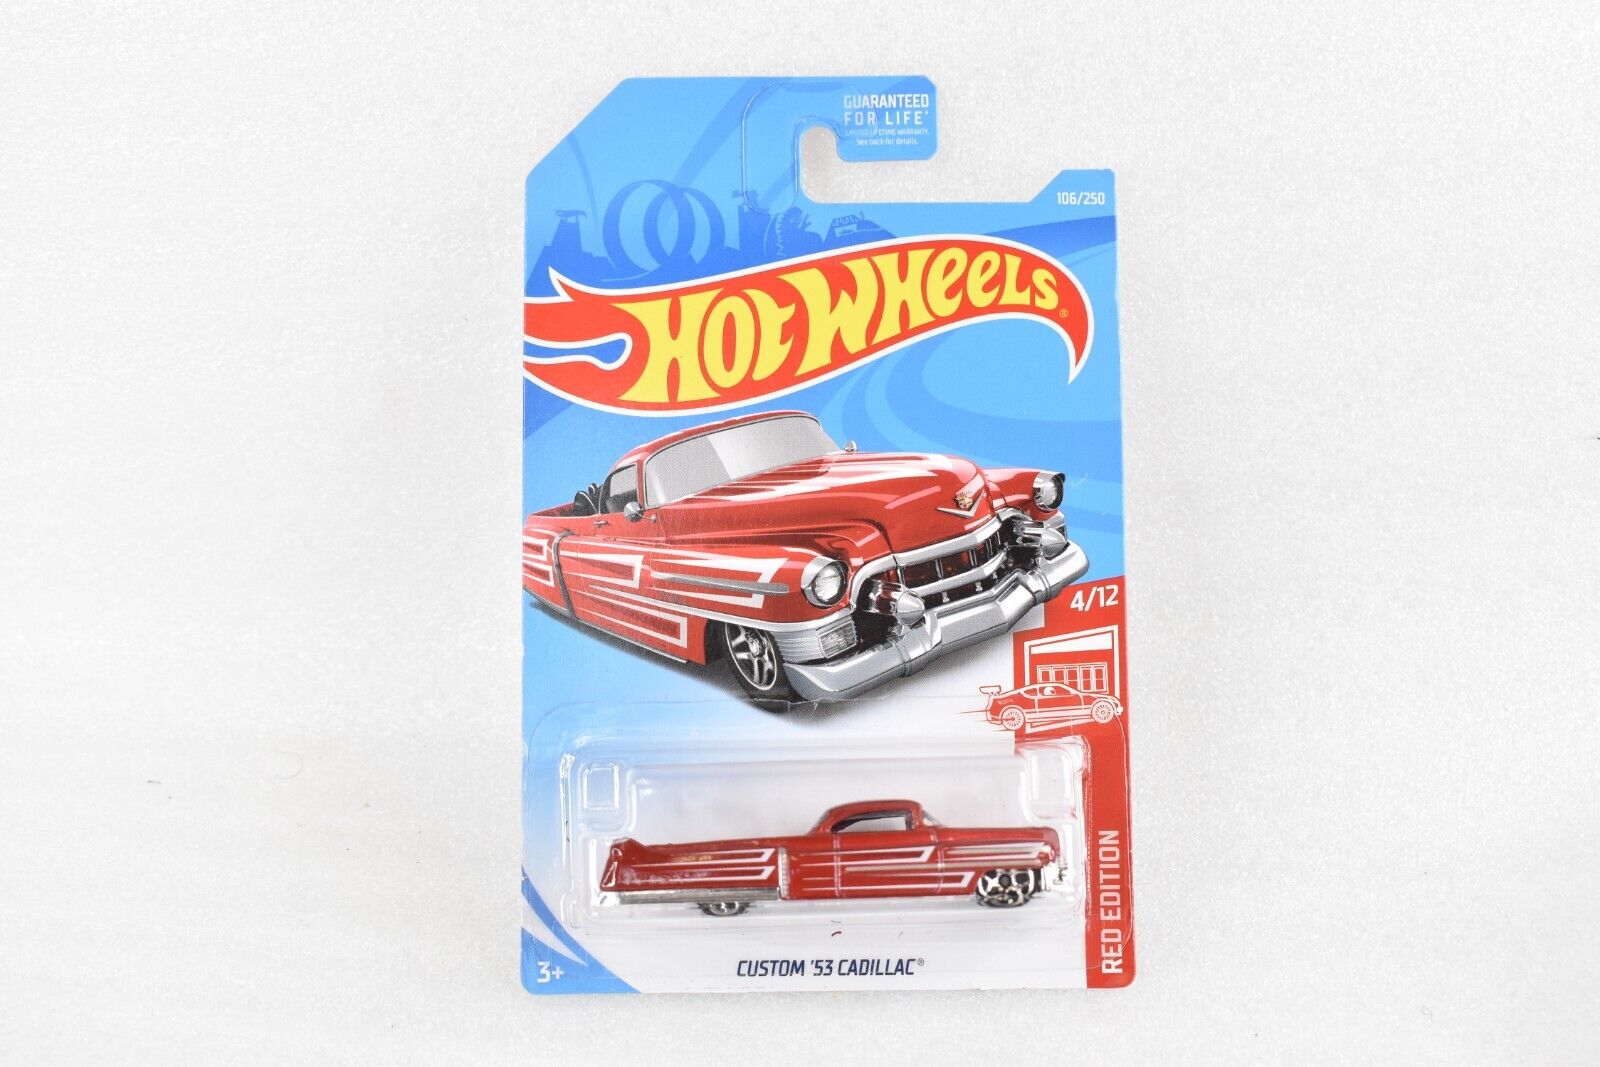 HOT WHEELS TARGET RED EDITION CUSTOM ’53 CADILLAC 4/12 COMBINED SHIPPING